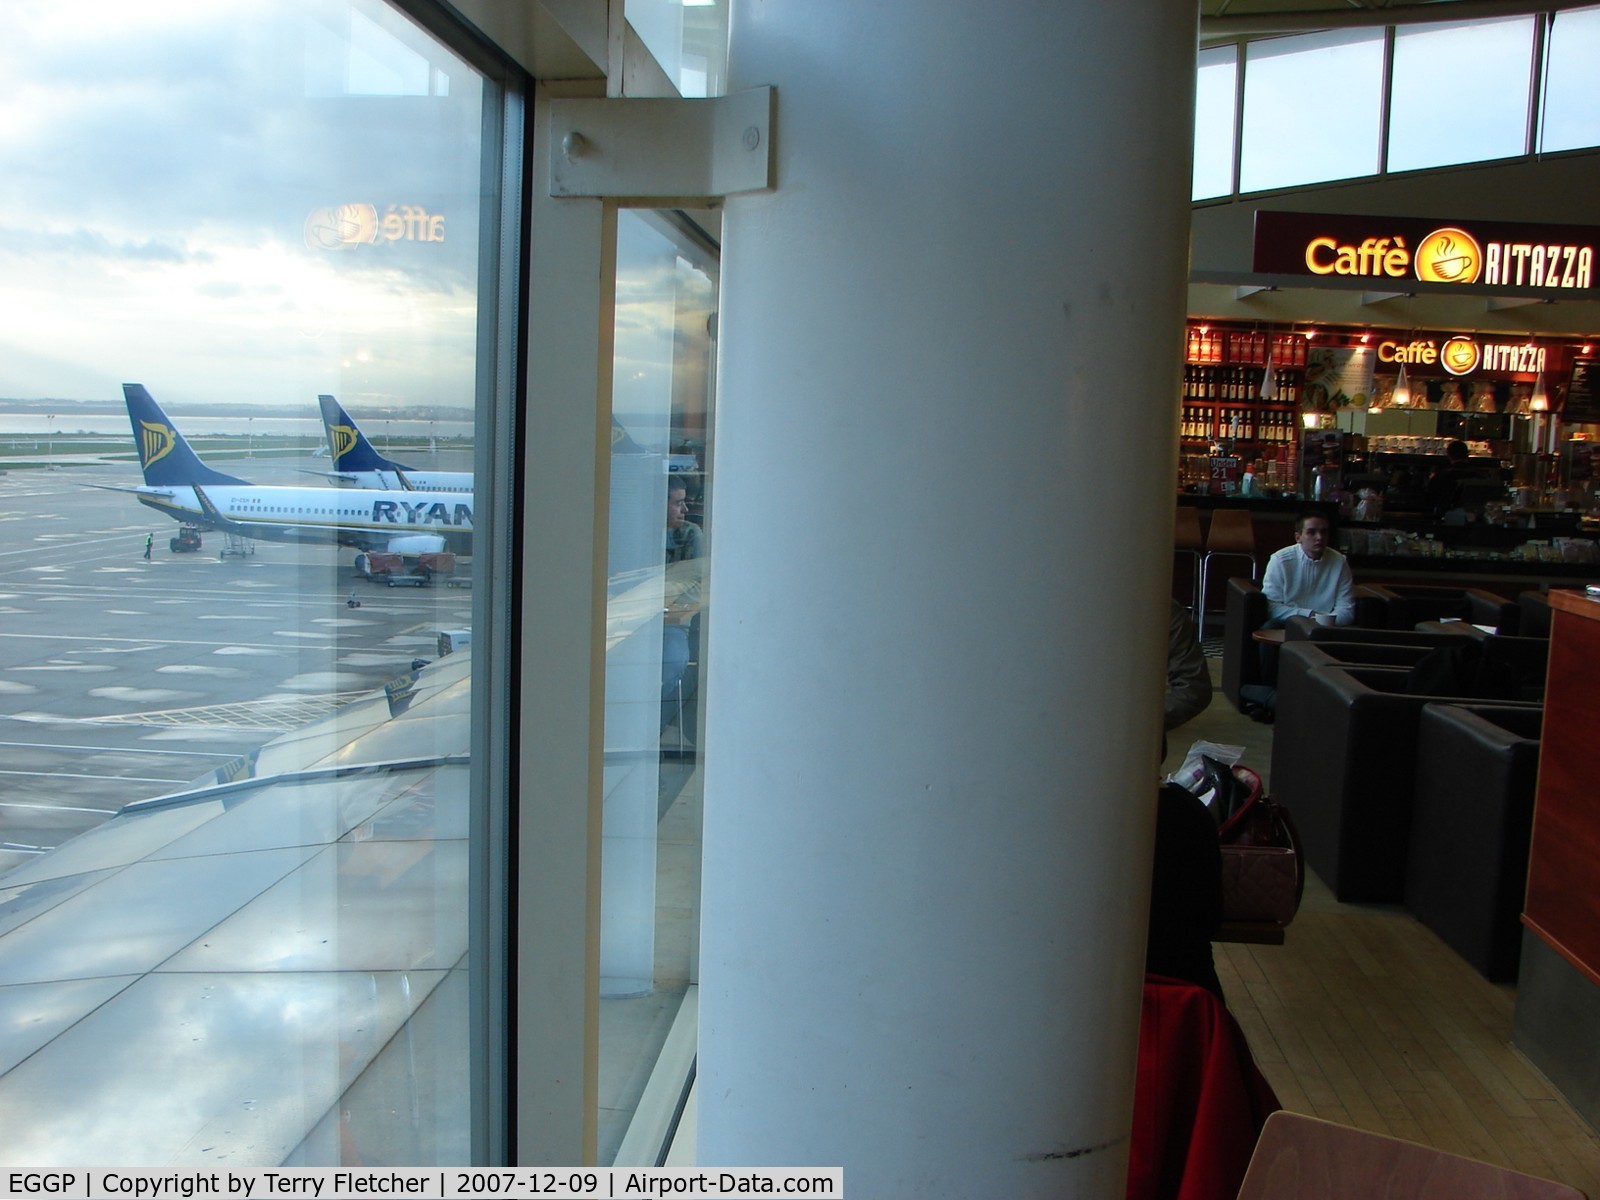 Liverpool John Lennon Airport, Liverpool, England United Kingdom (EGGP) - There is a nice Cafe that overlooks the Ryanair ramp BEFORE you go airside